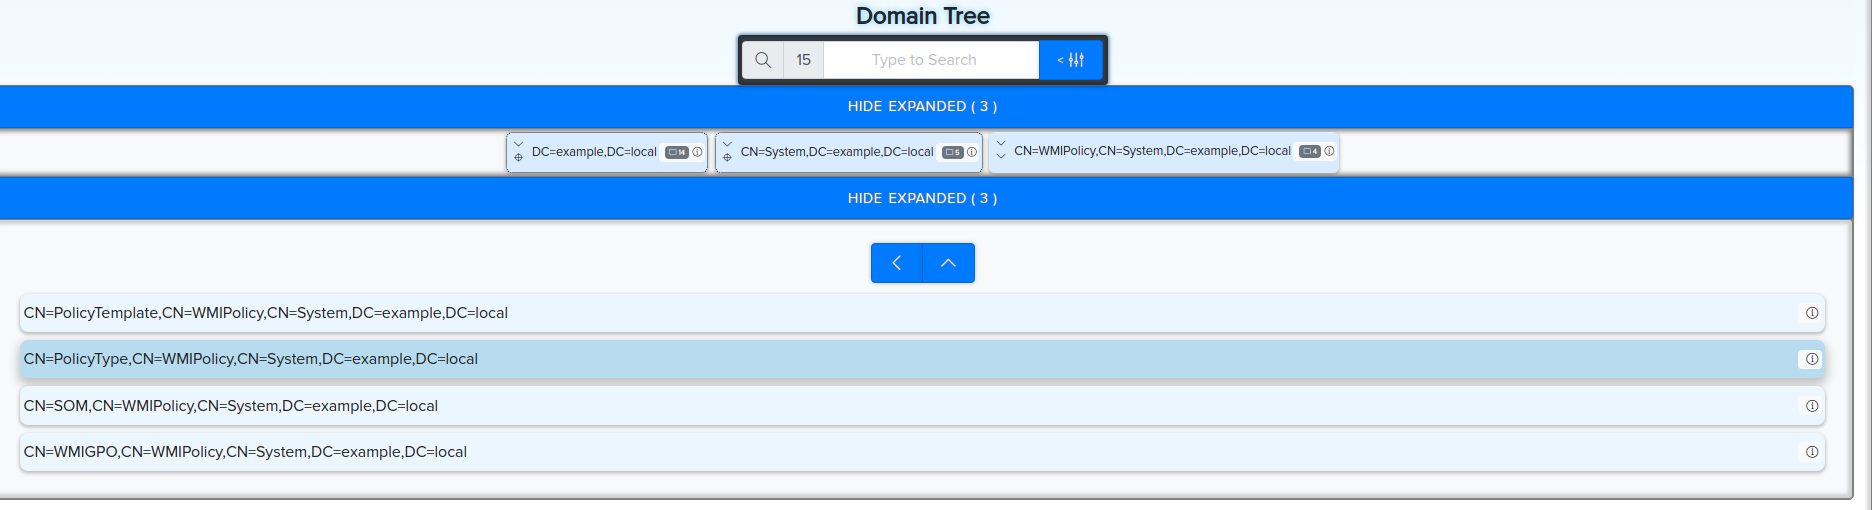 show_domain_tree_containers_nested_level_2.png